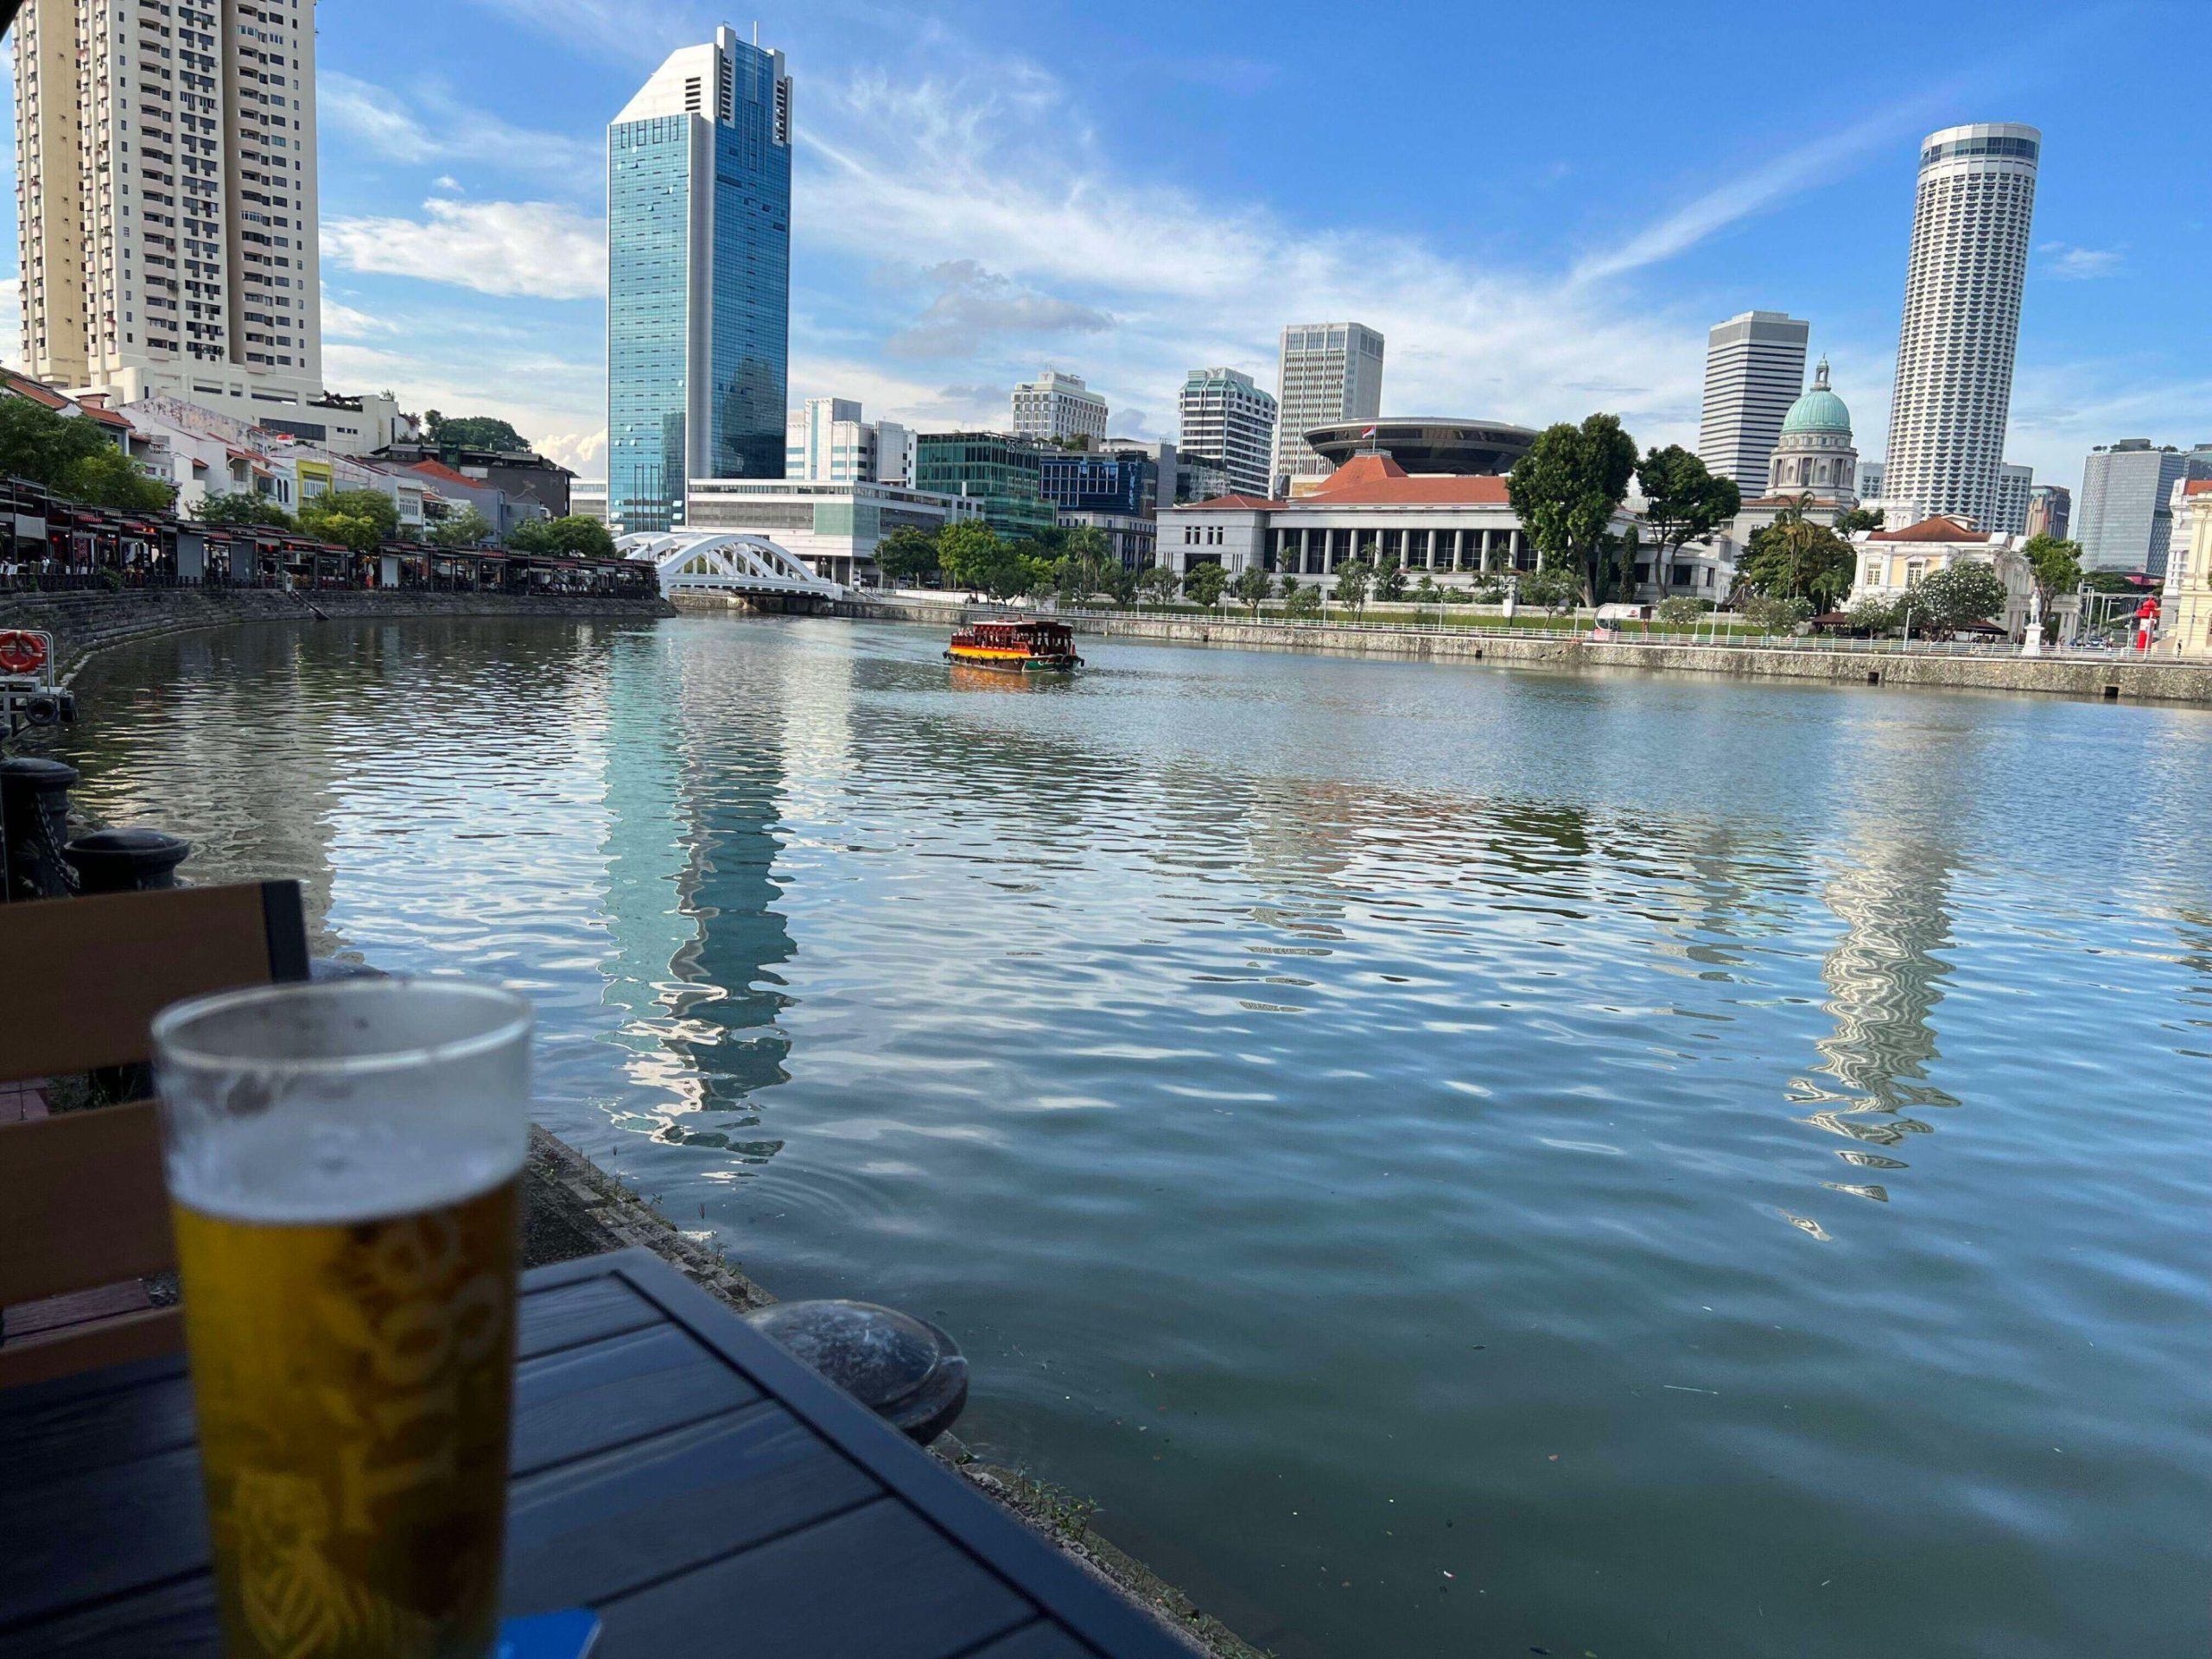 Singapore is nice, but if you drink, be rich